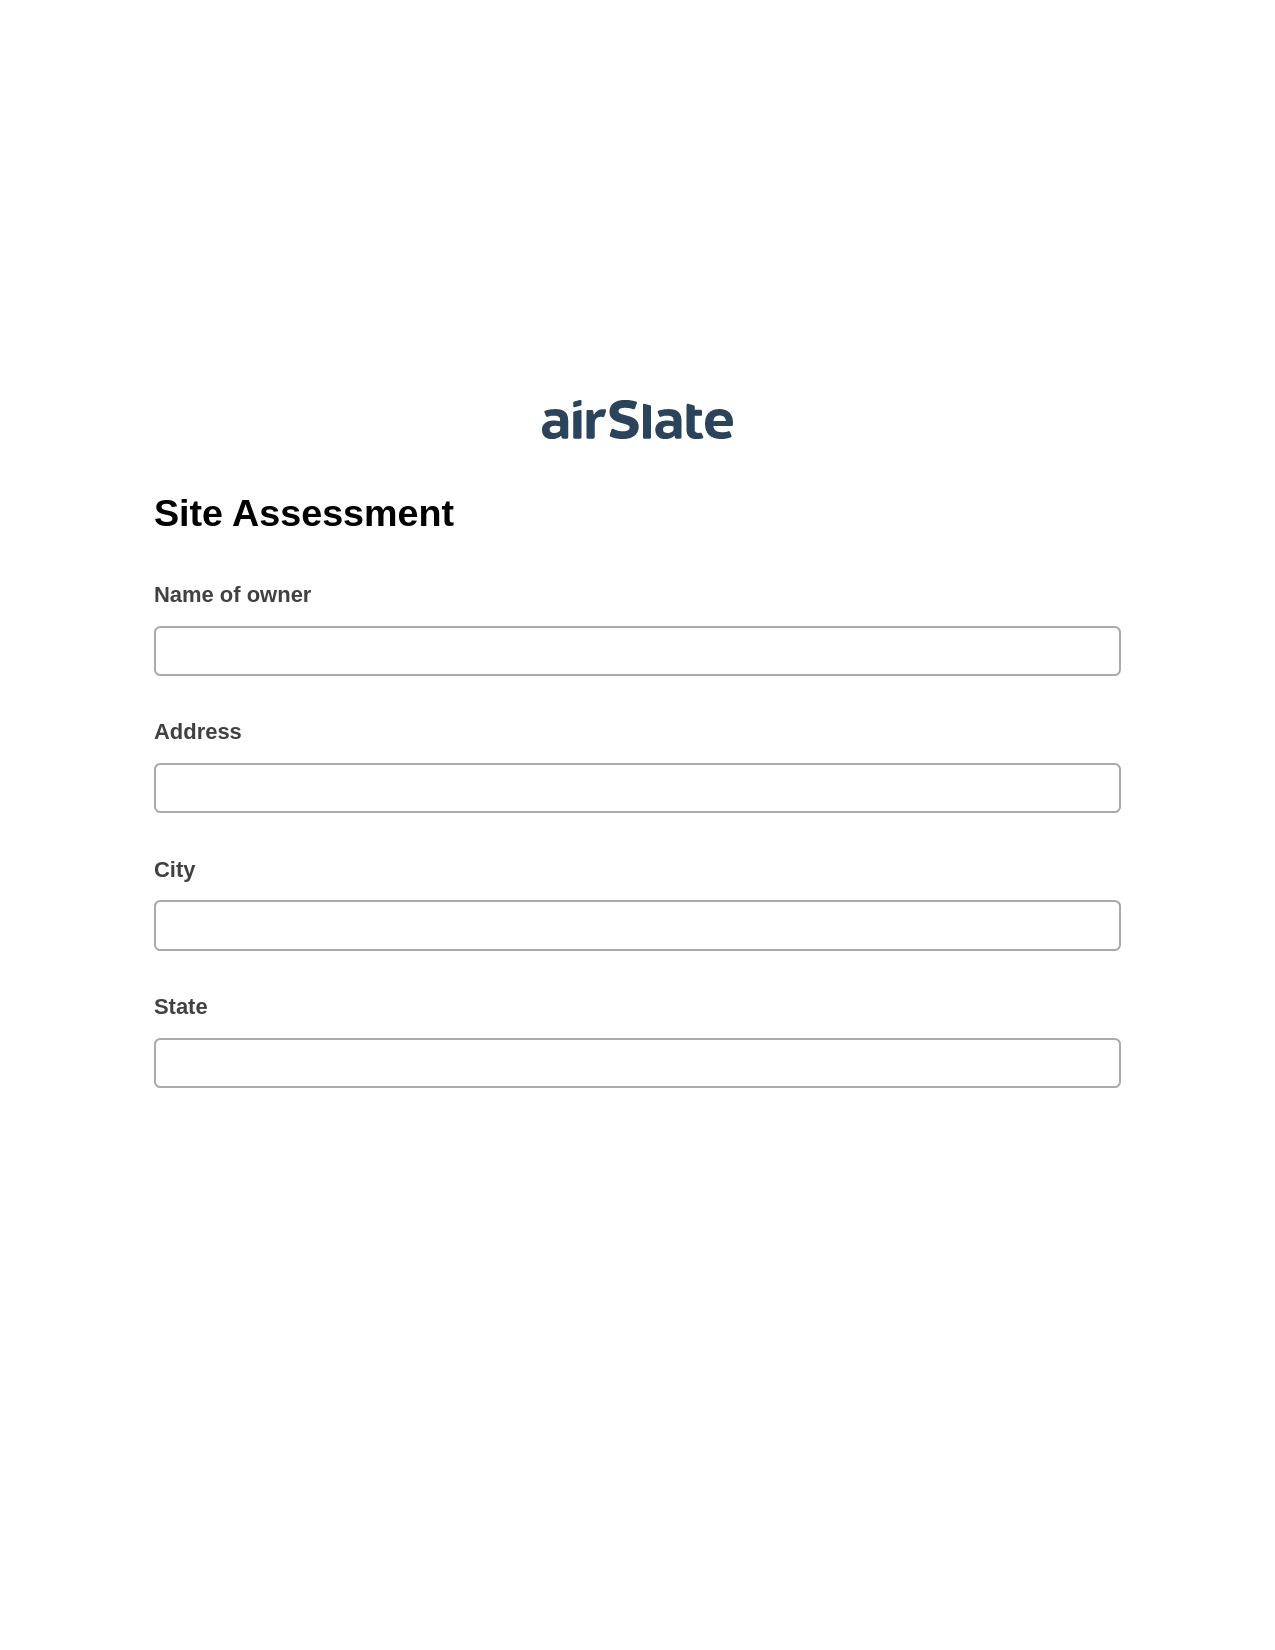 Site Assessment Pre-fill from NetSuite Records Bot, Google Sheet Two-Way Binding Bot, Post-finish Document Bot